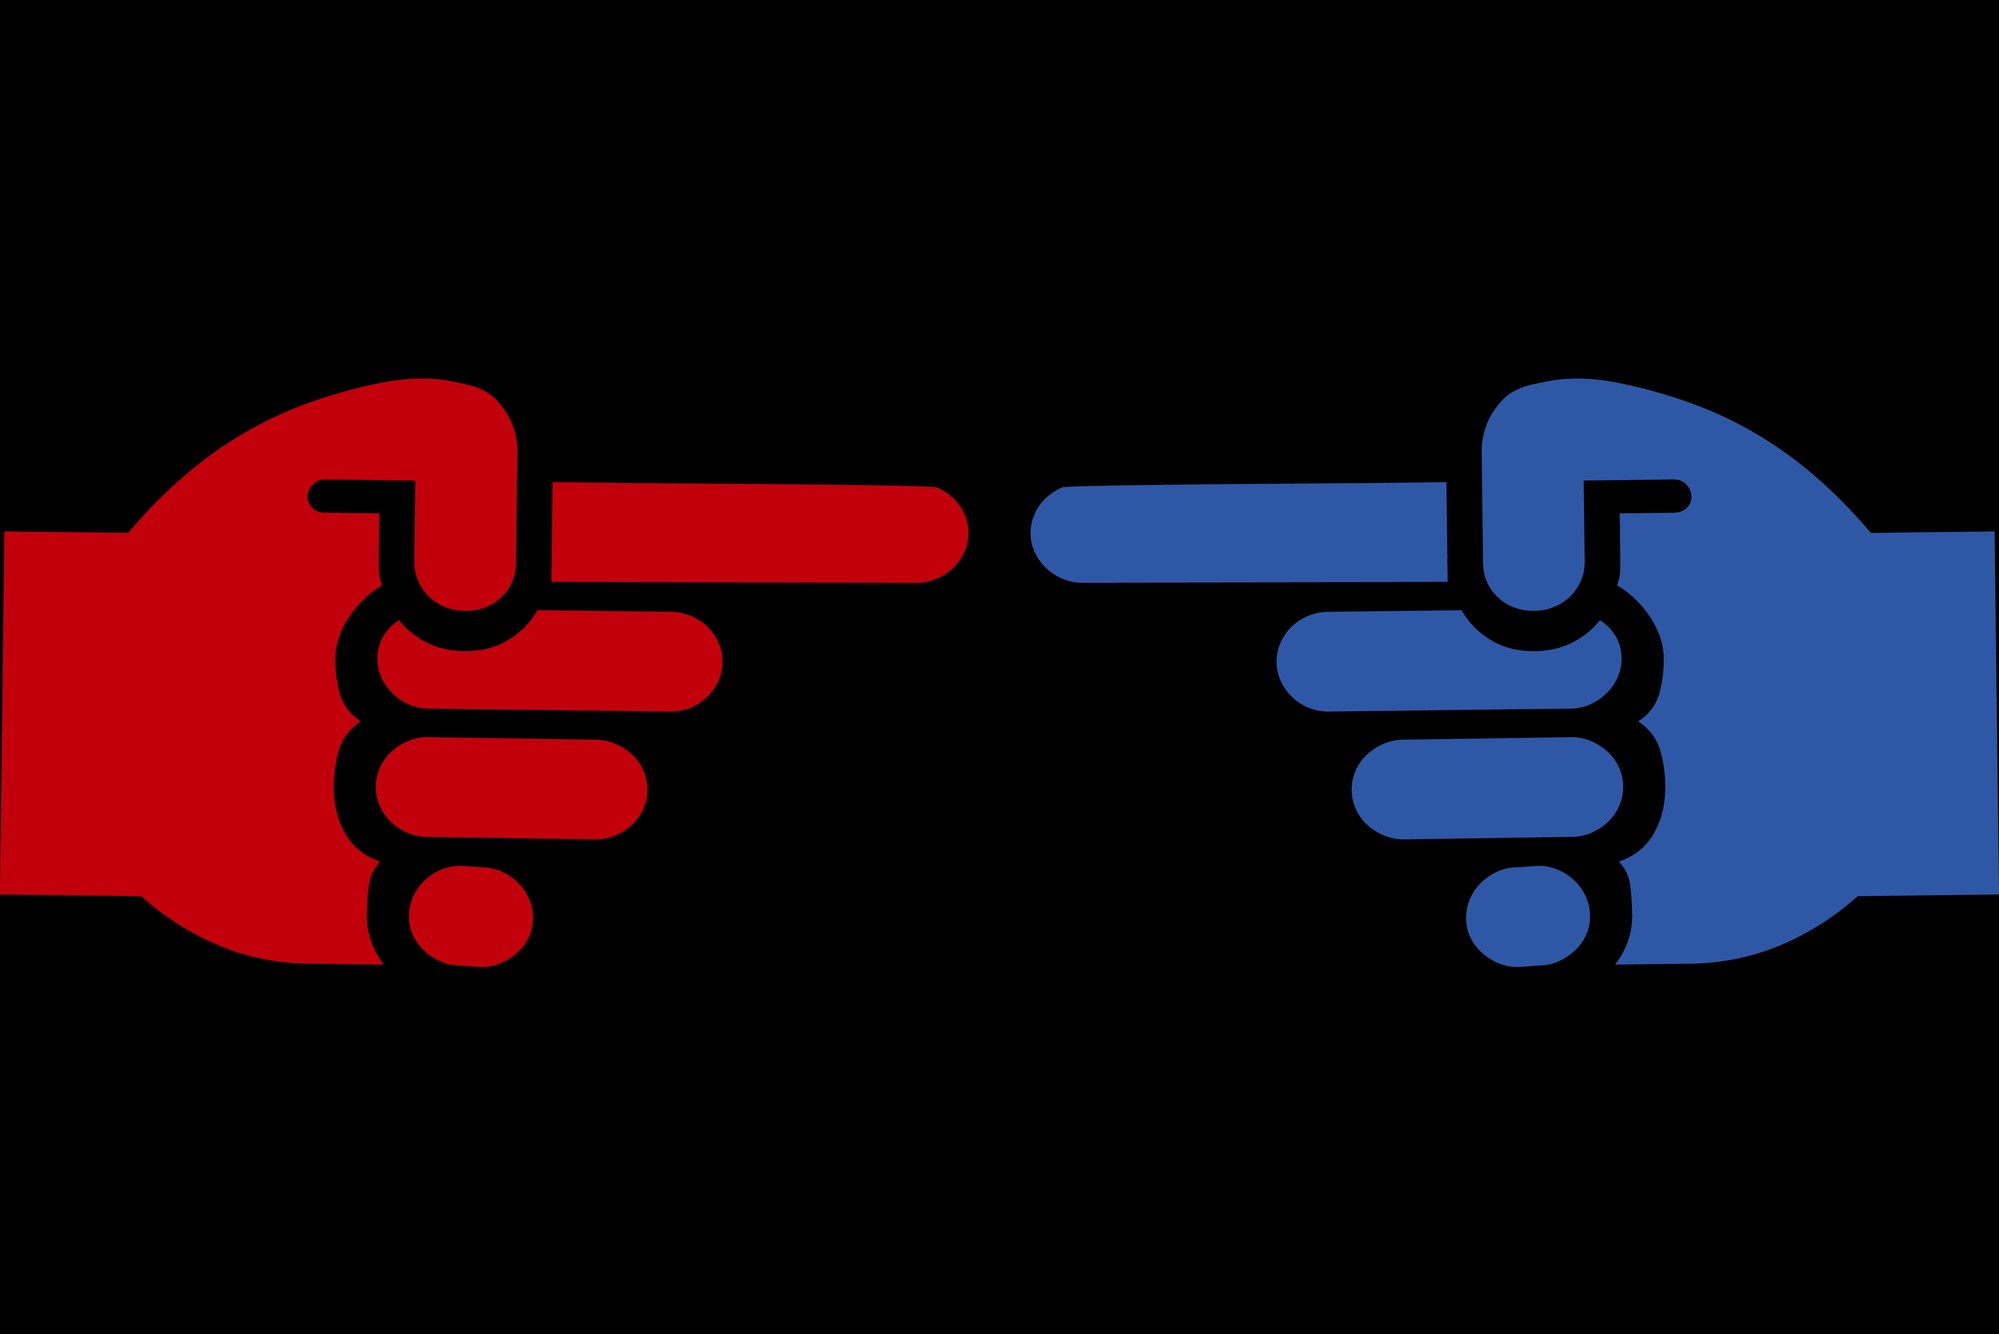 image of blue and red fingers pointing at each other